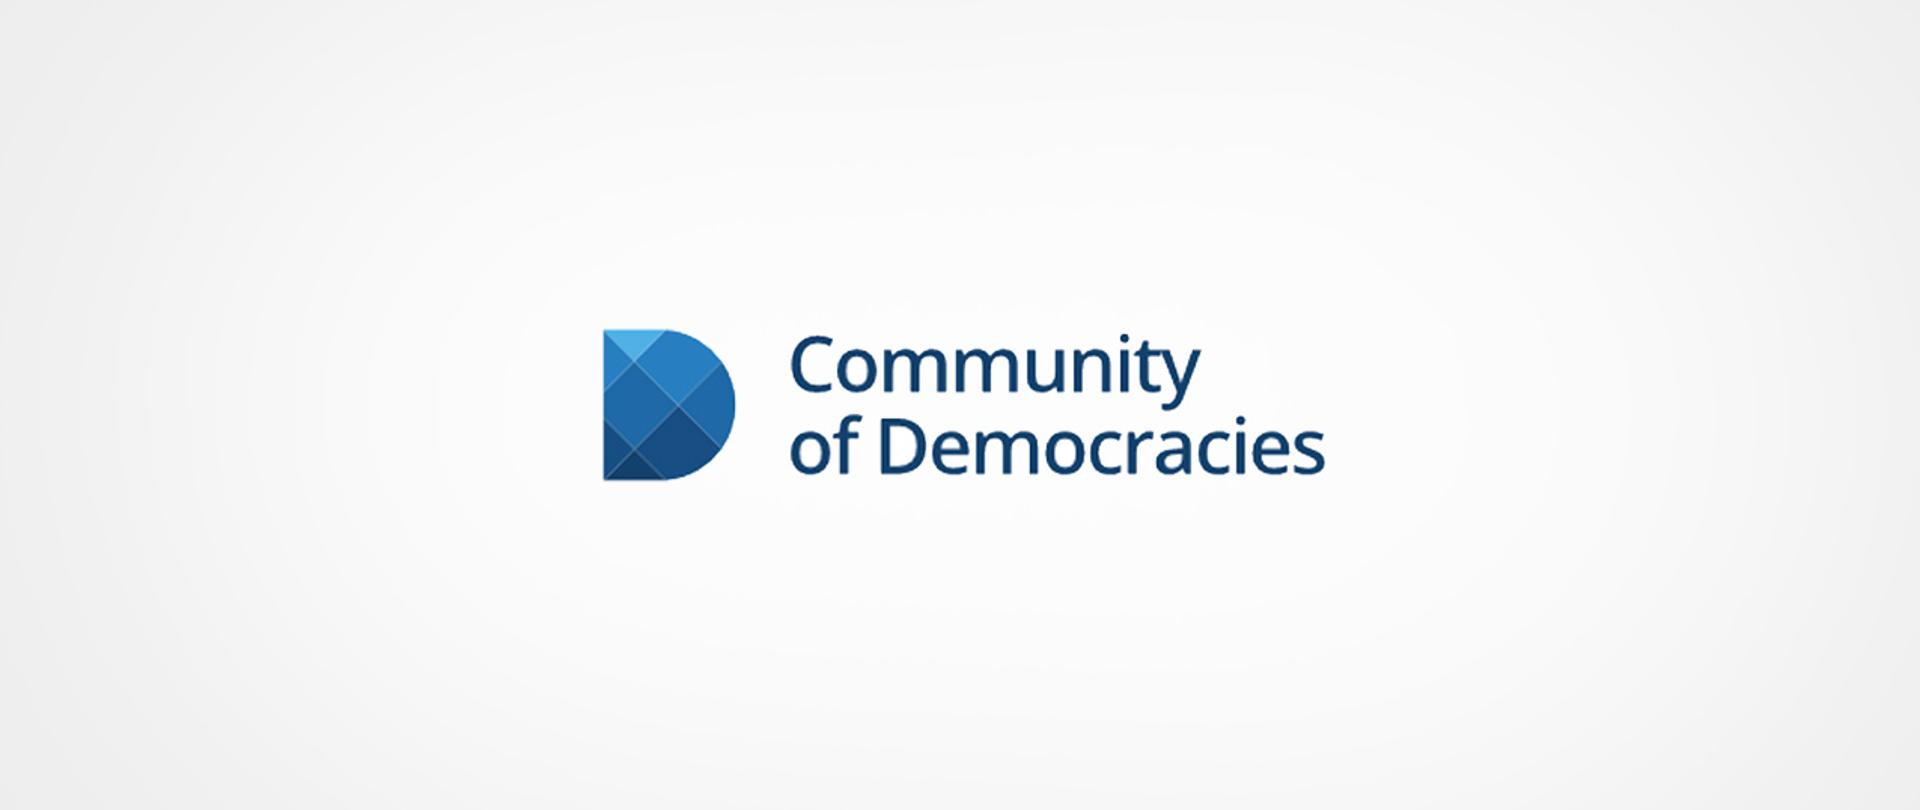 Poland takes over presidency of the Community of Democracies